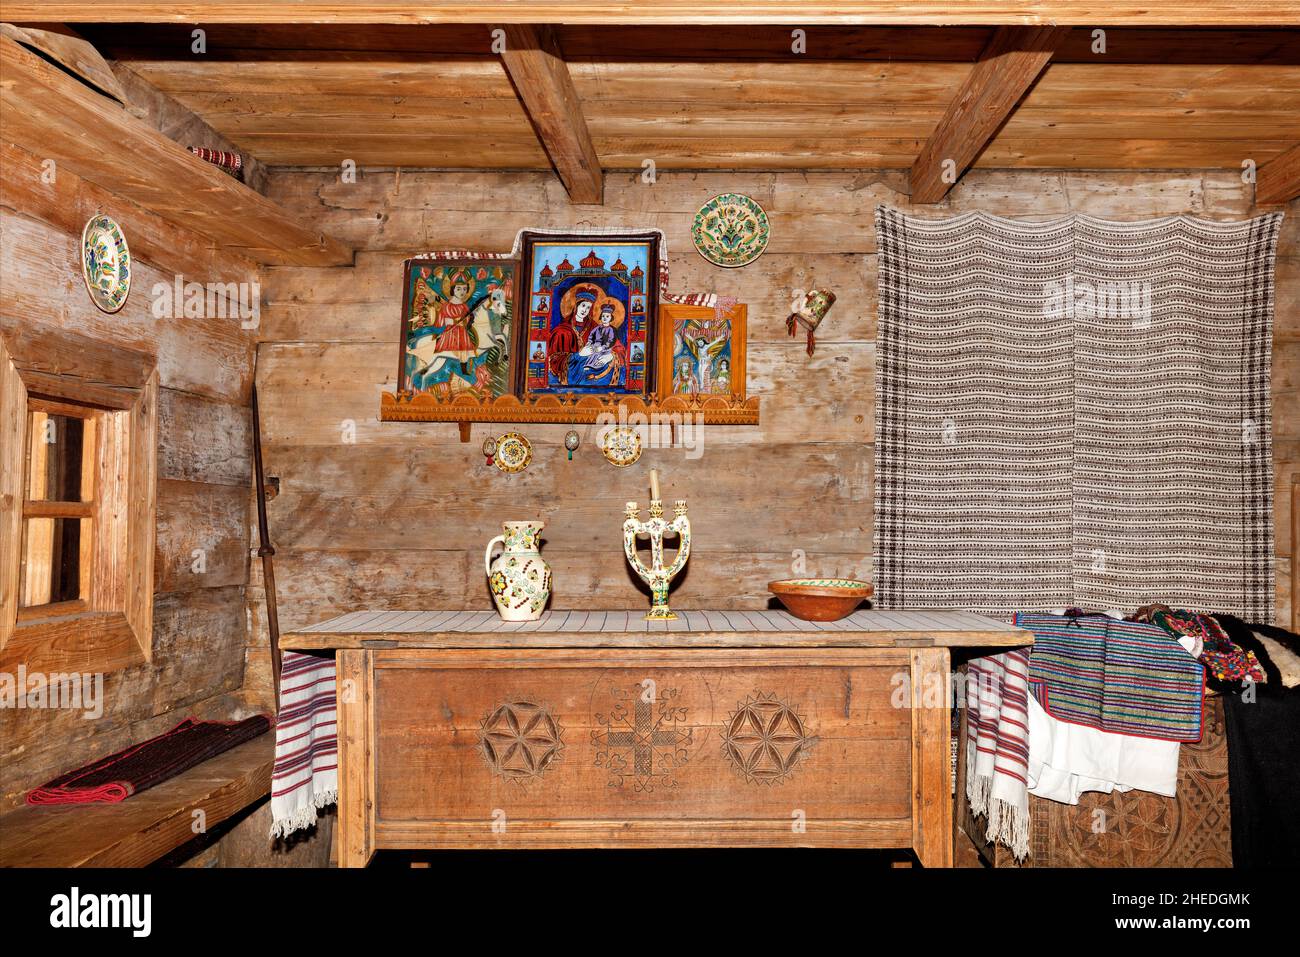 The interior of the living room of an old Ukrainian rural hut with holy images over a carved dining table and embroidered linen towels. Stock Photo